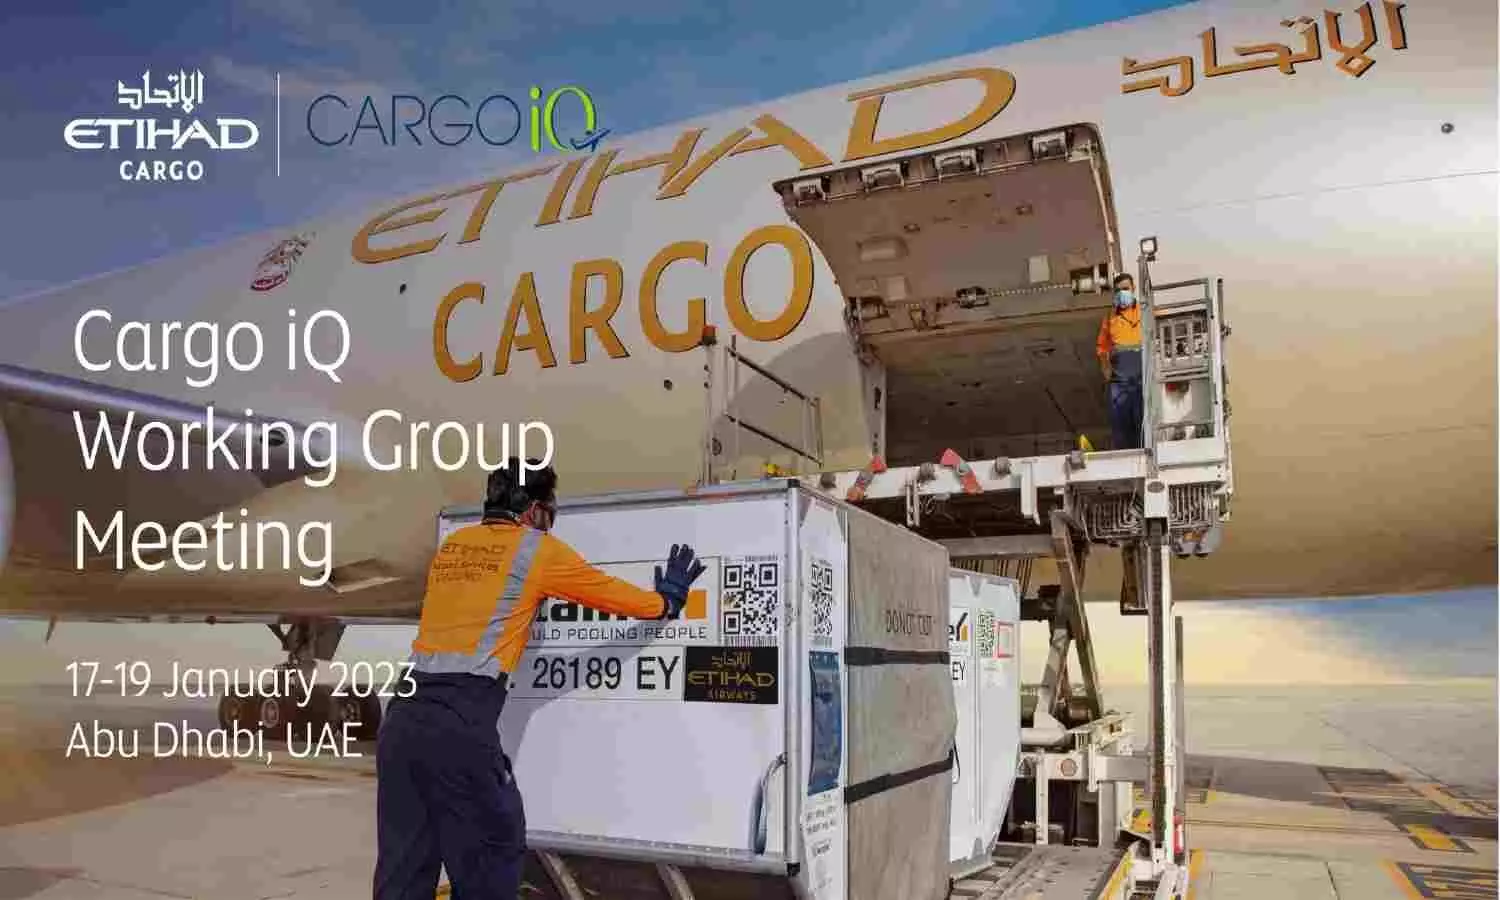 Cargo IQ working group conference to be held in Abu Dhabi by Etihad Cargo